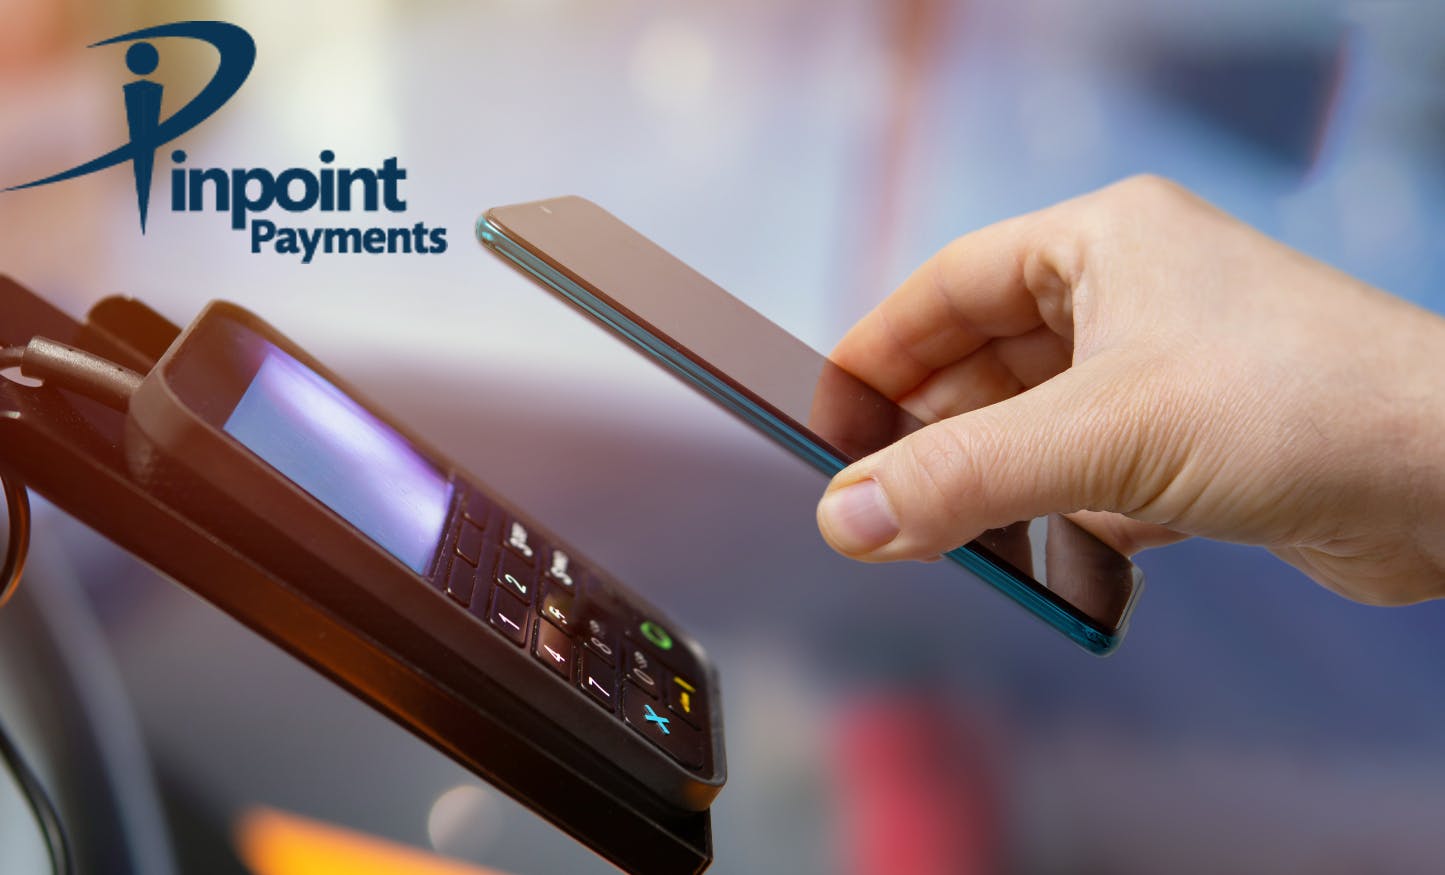 Pinpoint Payments: Payment Processing Review